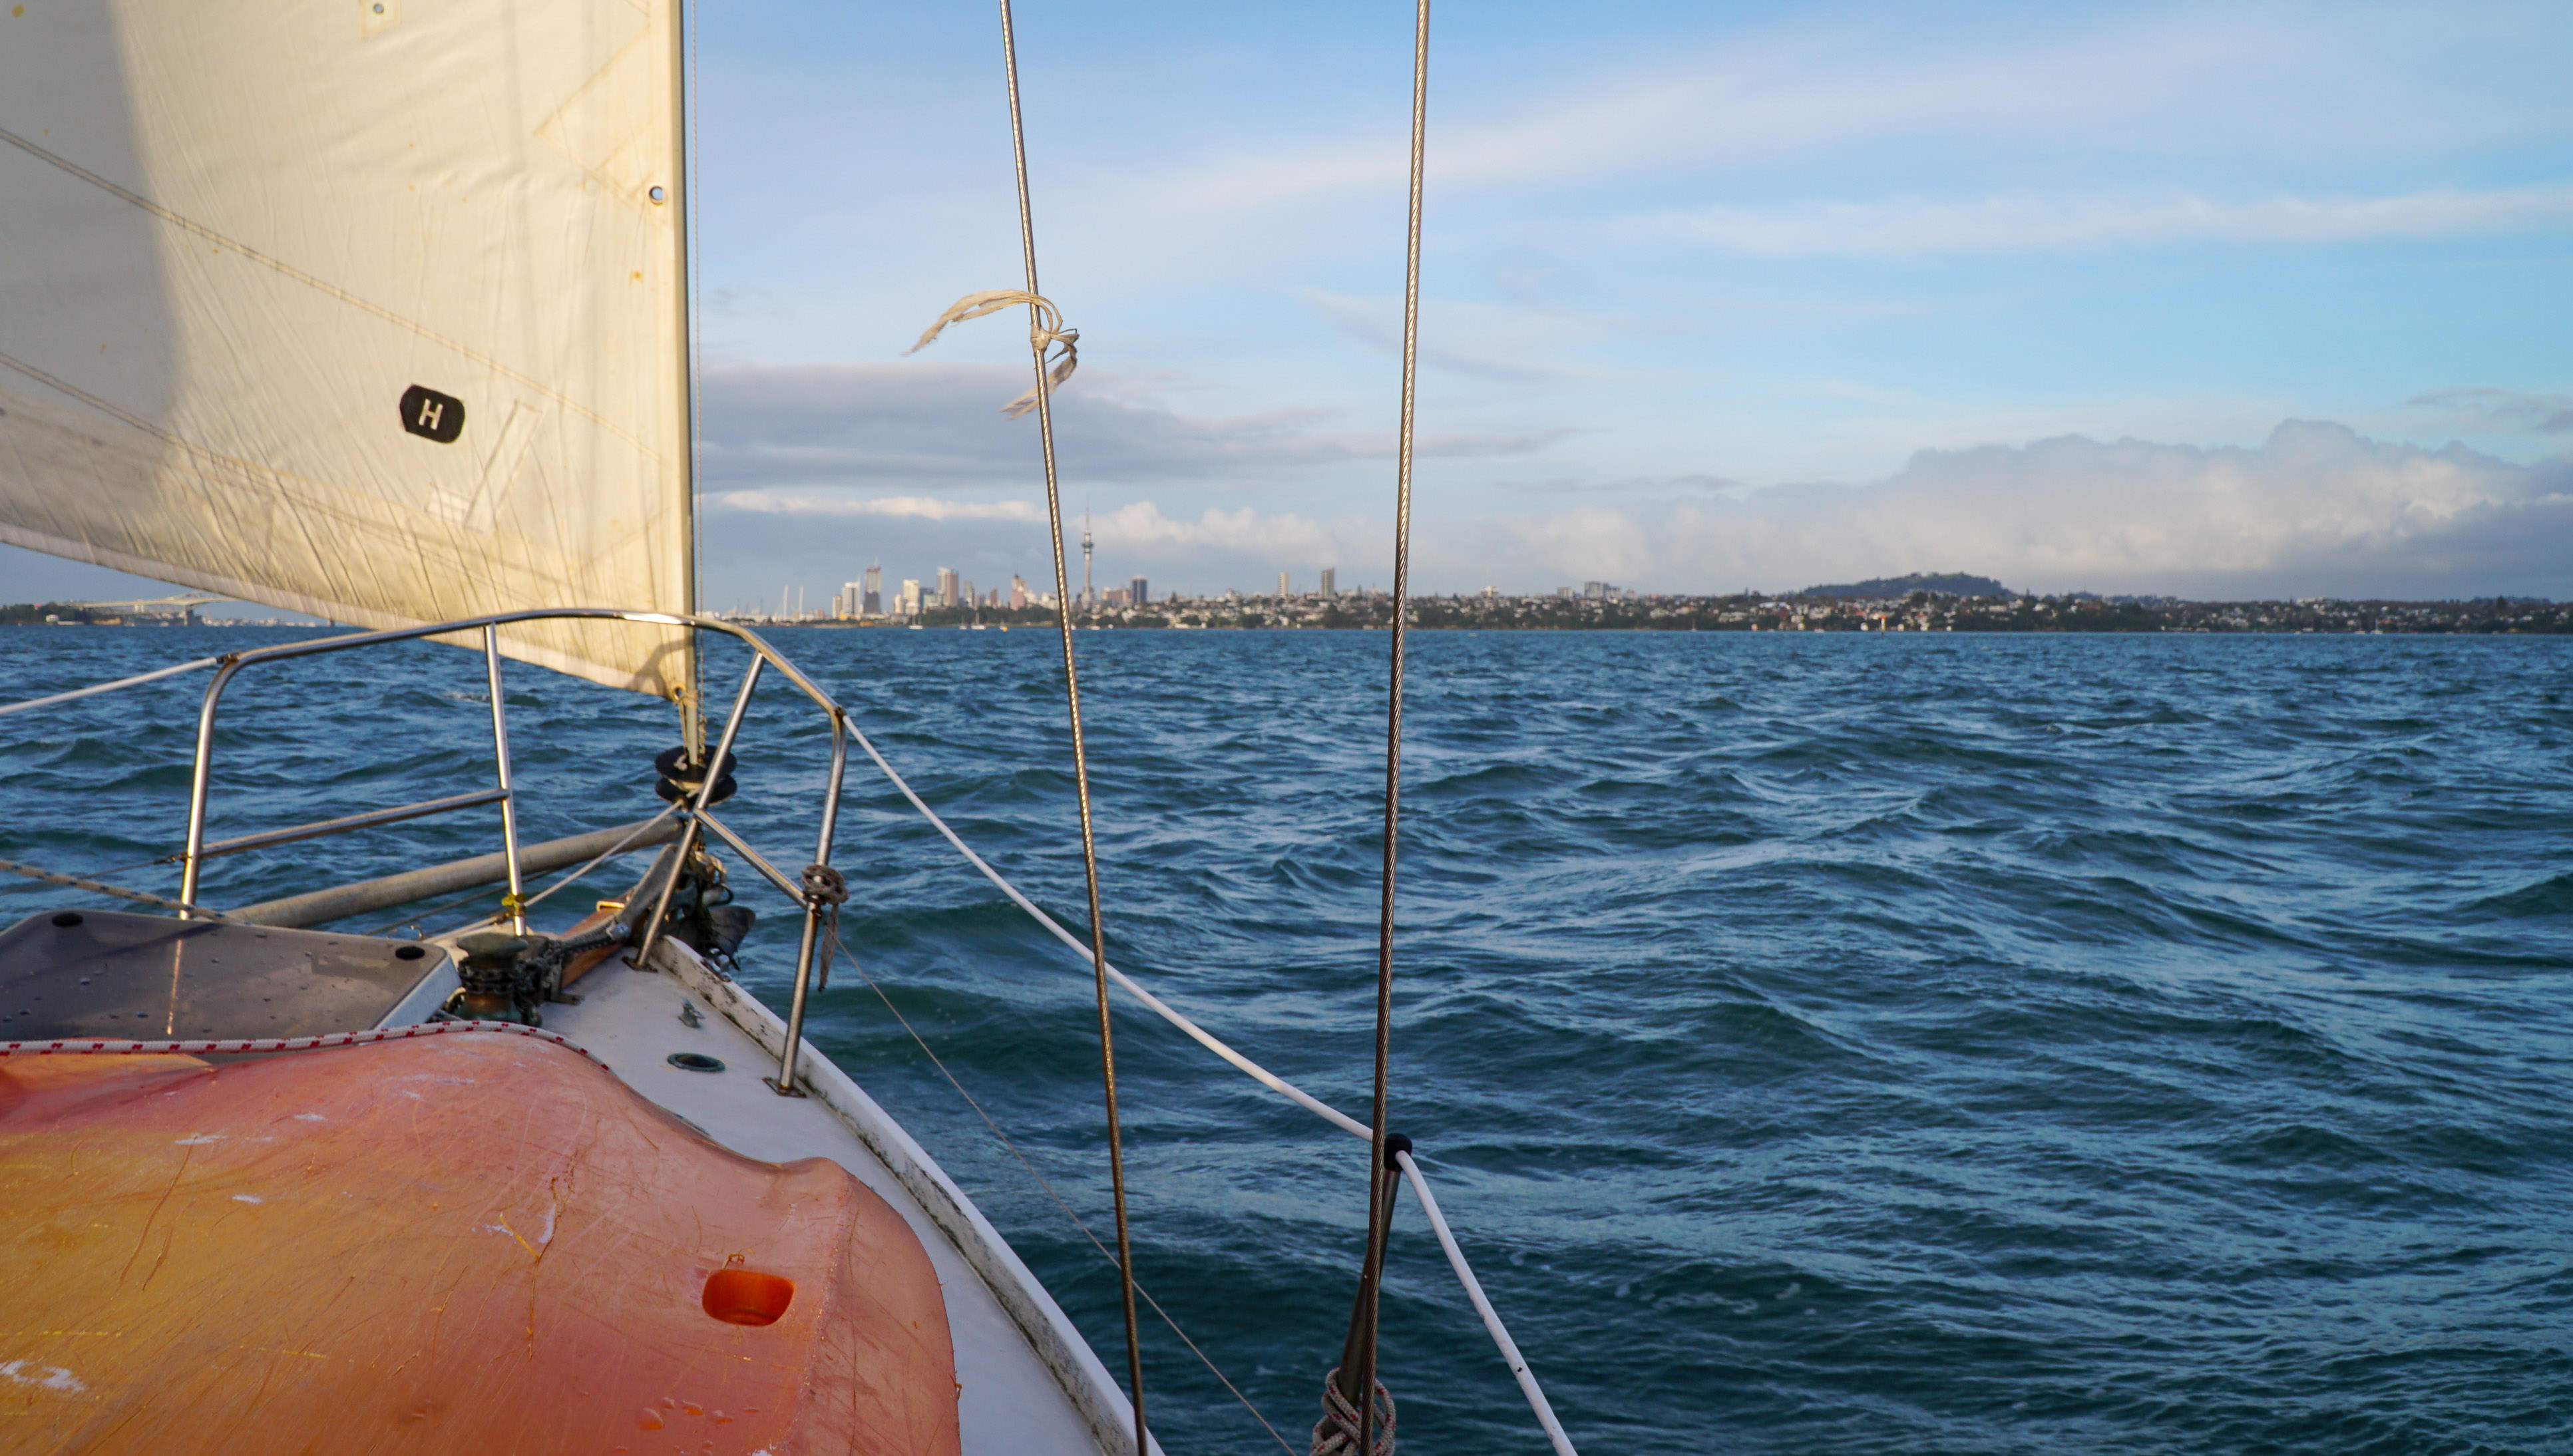 View from a sailboat in a harbor.